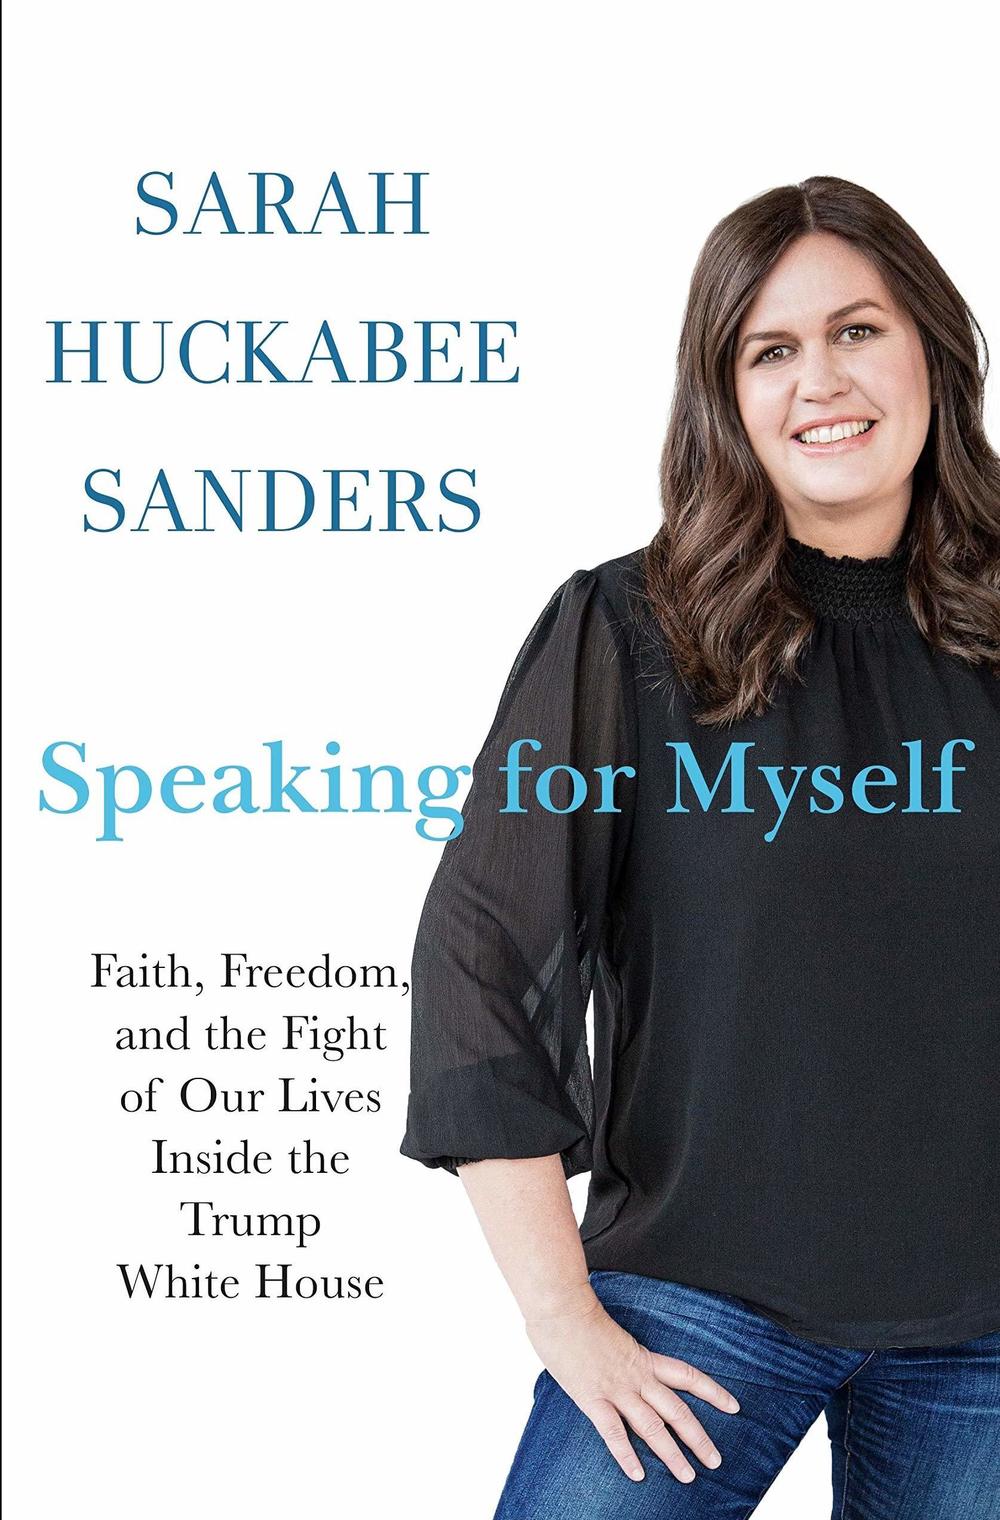 <em>Speaking for Myself: Faith, Freedom, and the Fight of Our Lives Inside the Trump White House,</em> by Sarah Huckabee Sanders